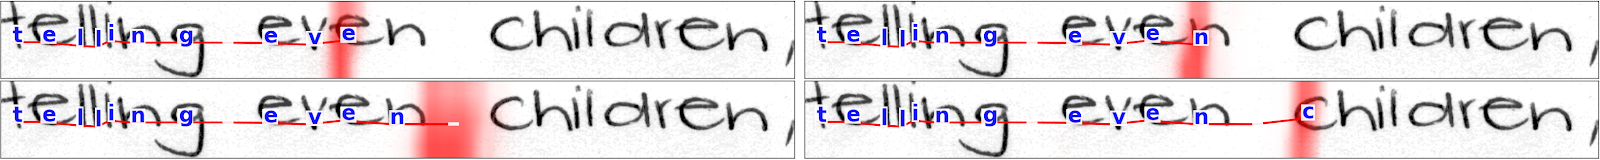 LSTM example: automatic transcription without a prior segmentation into lines,